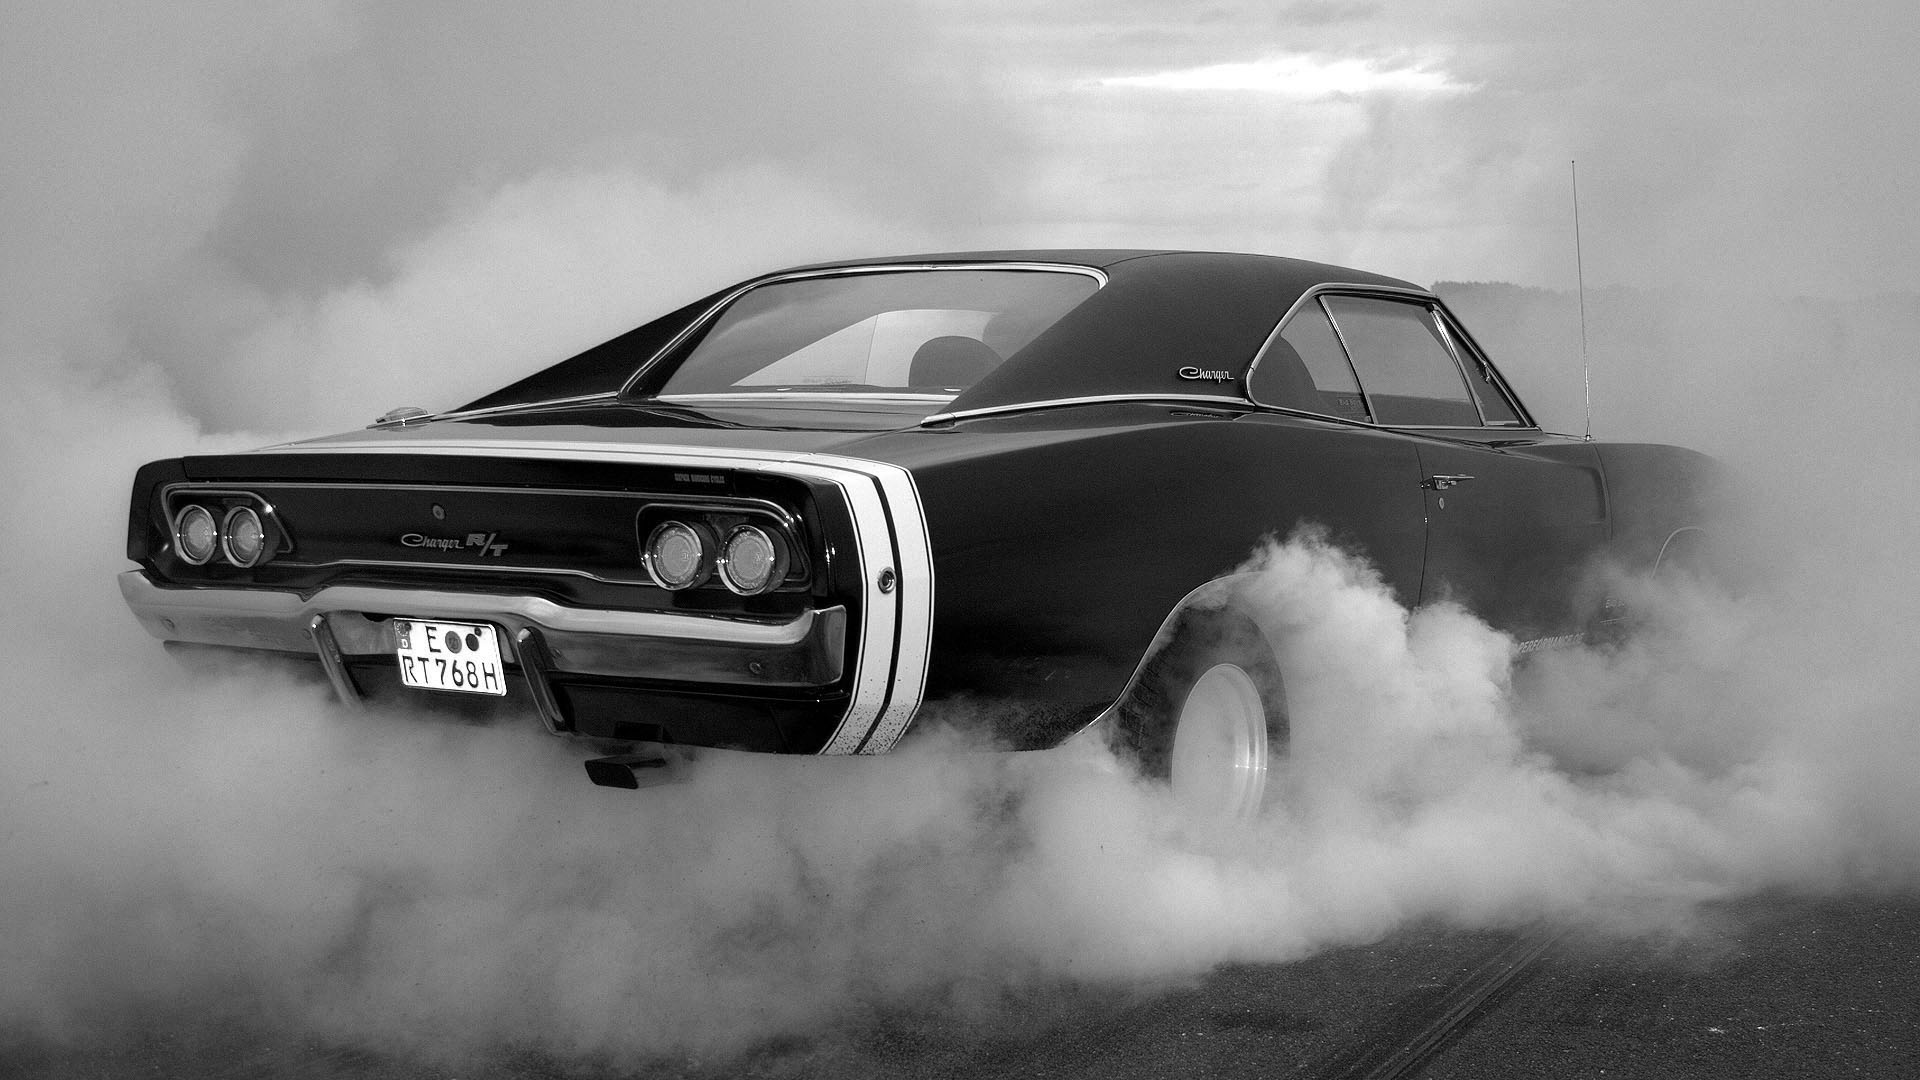 One of the fastest cars under 30K can burnout.